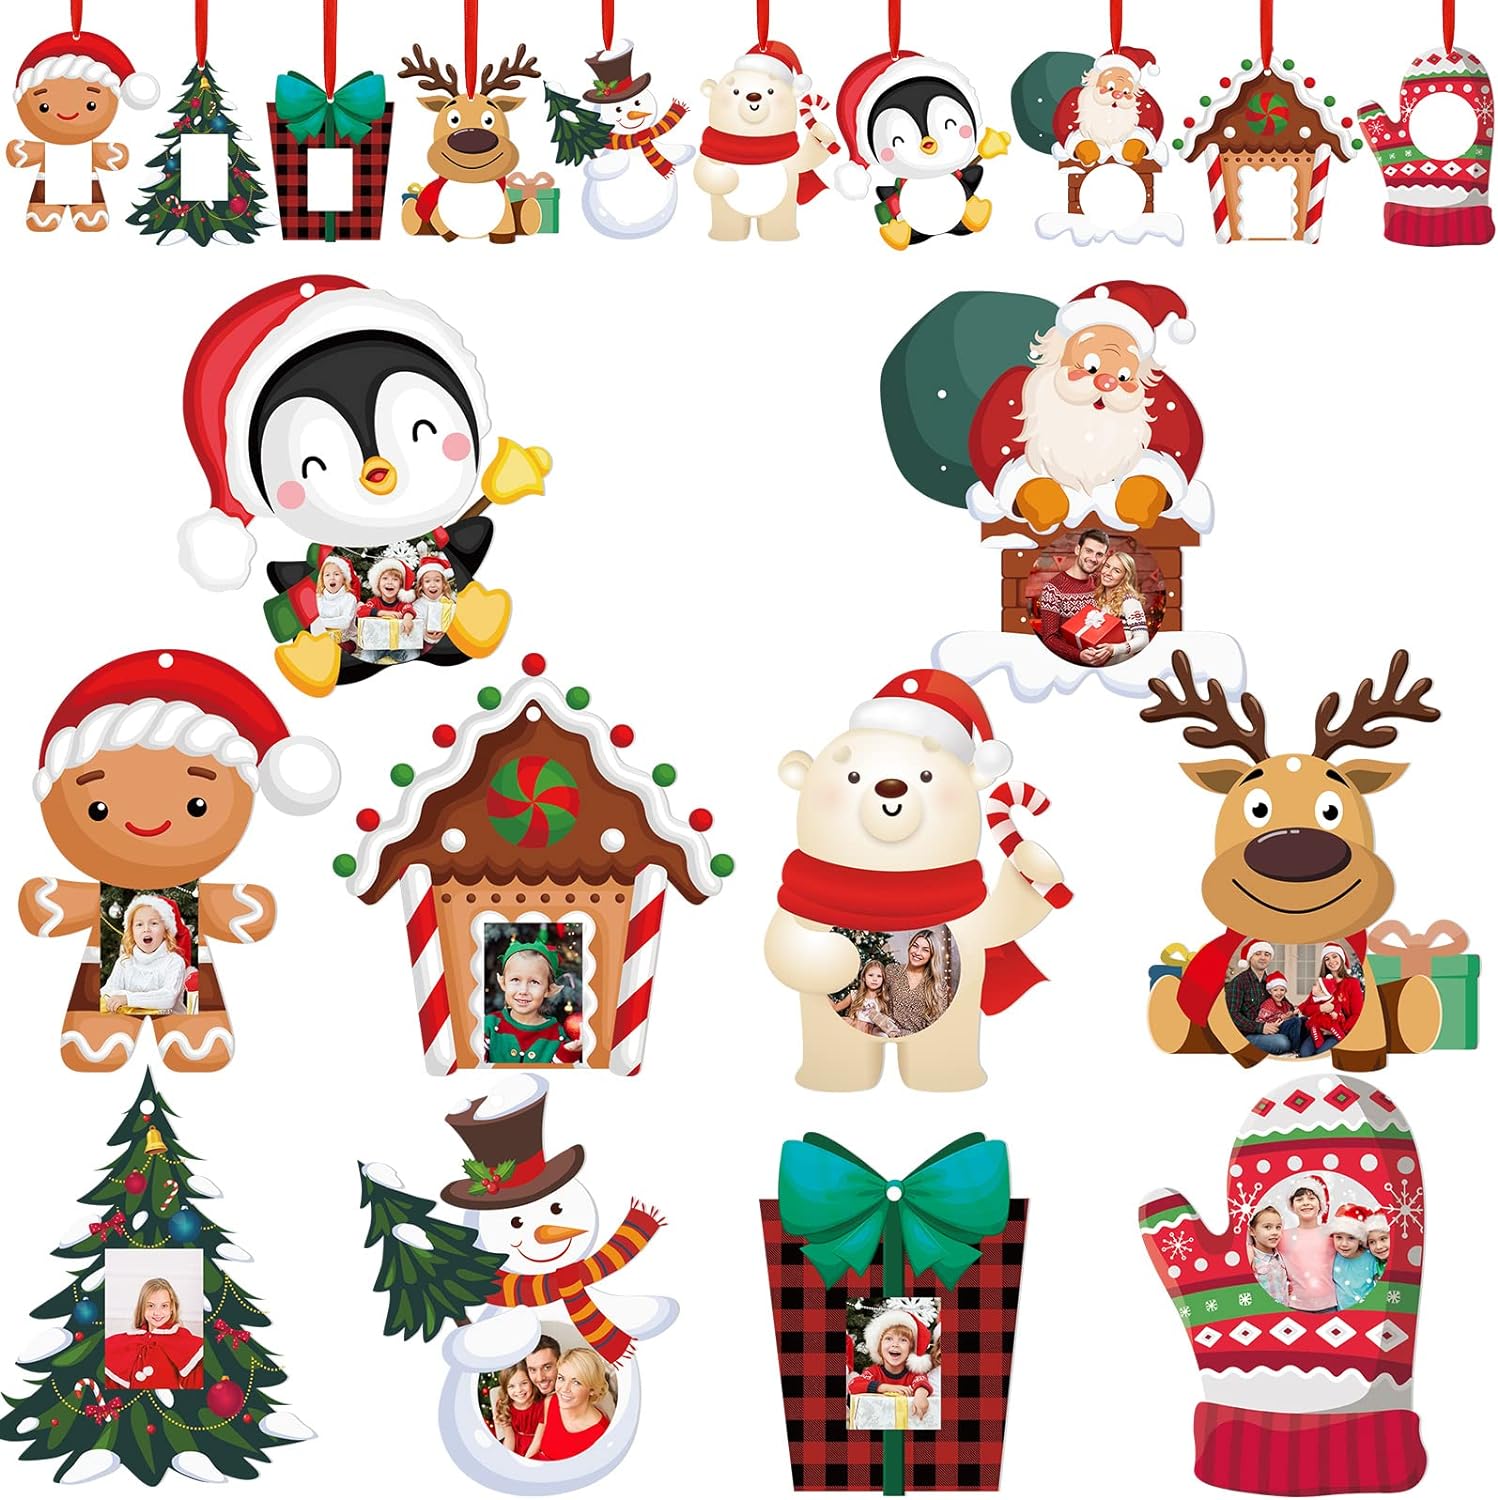 BBTO 30 Pcs Christmas Picture Frame Character Picture Frame Ornament DIY Photo Ornaments Picture Ornament Craft for Christmas Tree Kids Holiday Keepsake Xmas Party Decoration